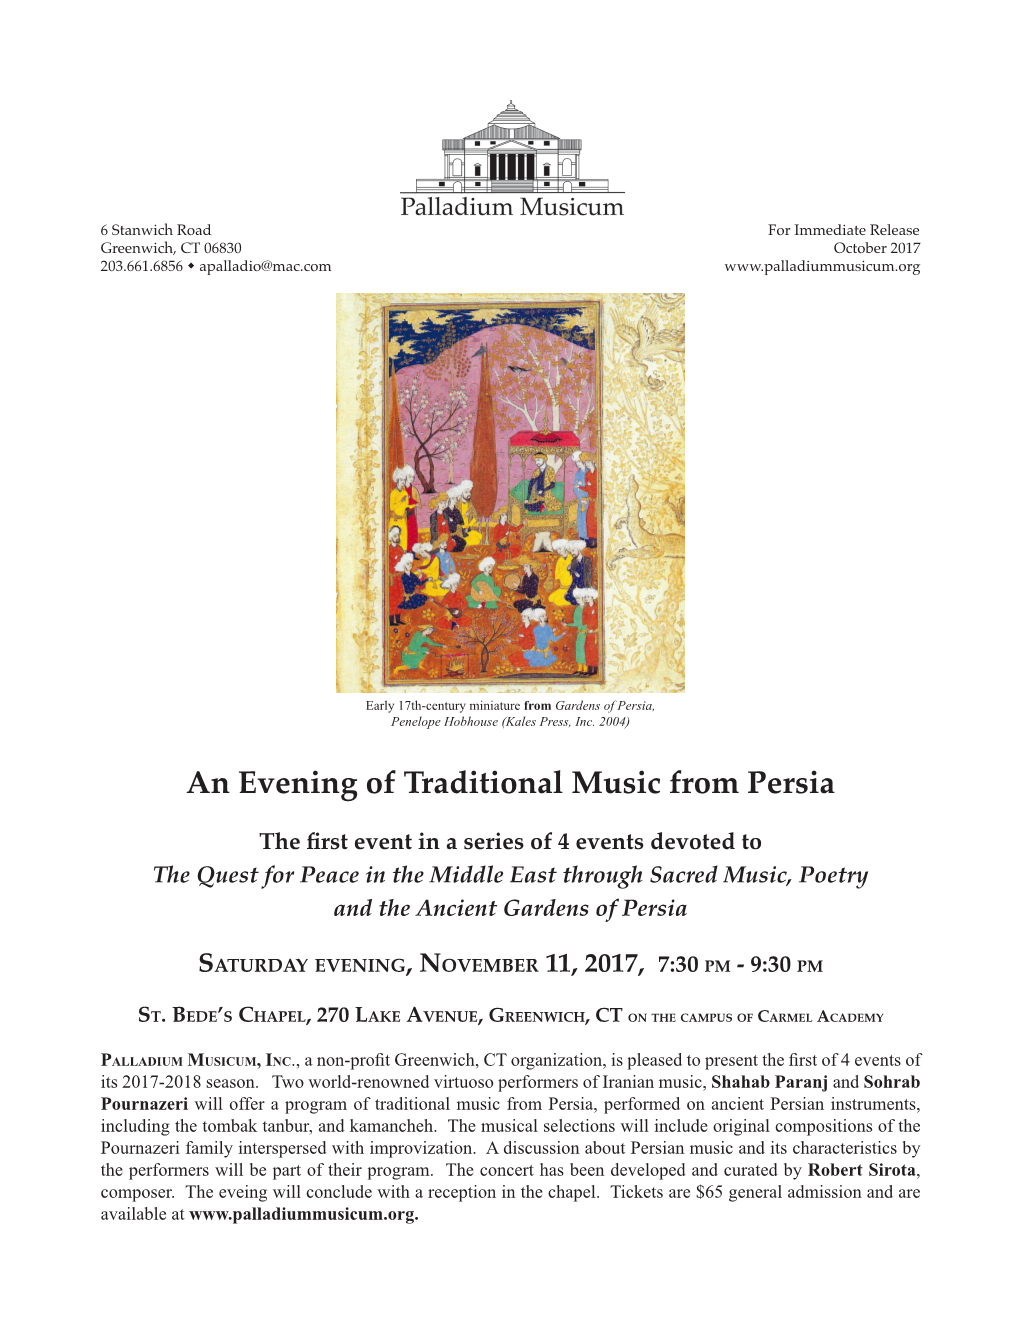 An Evening of Traditional Music from Persia